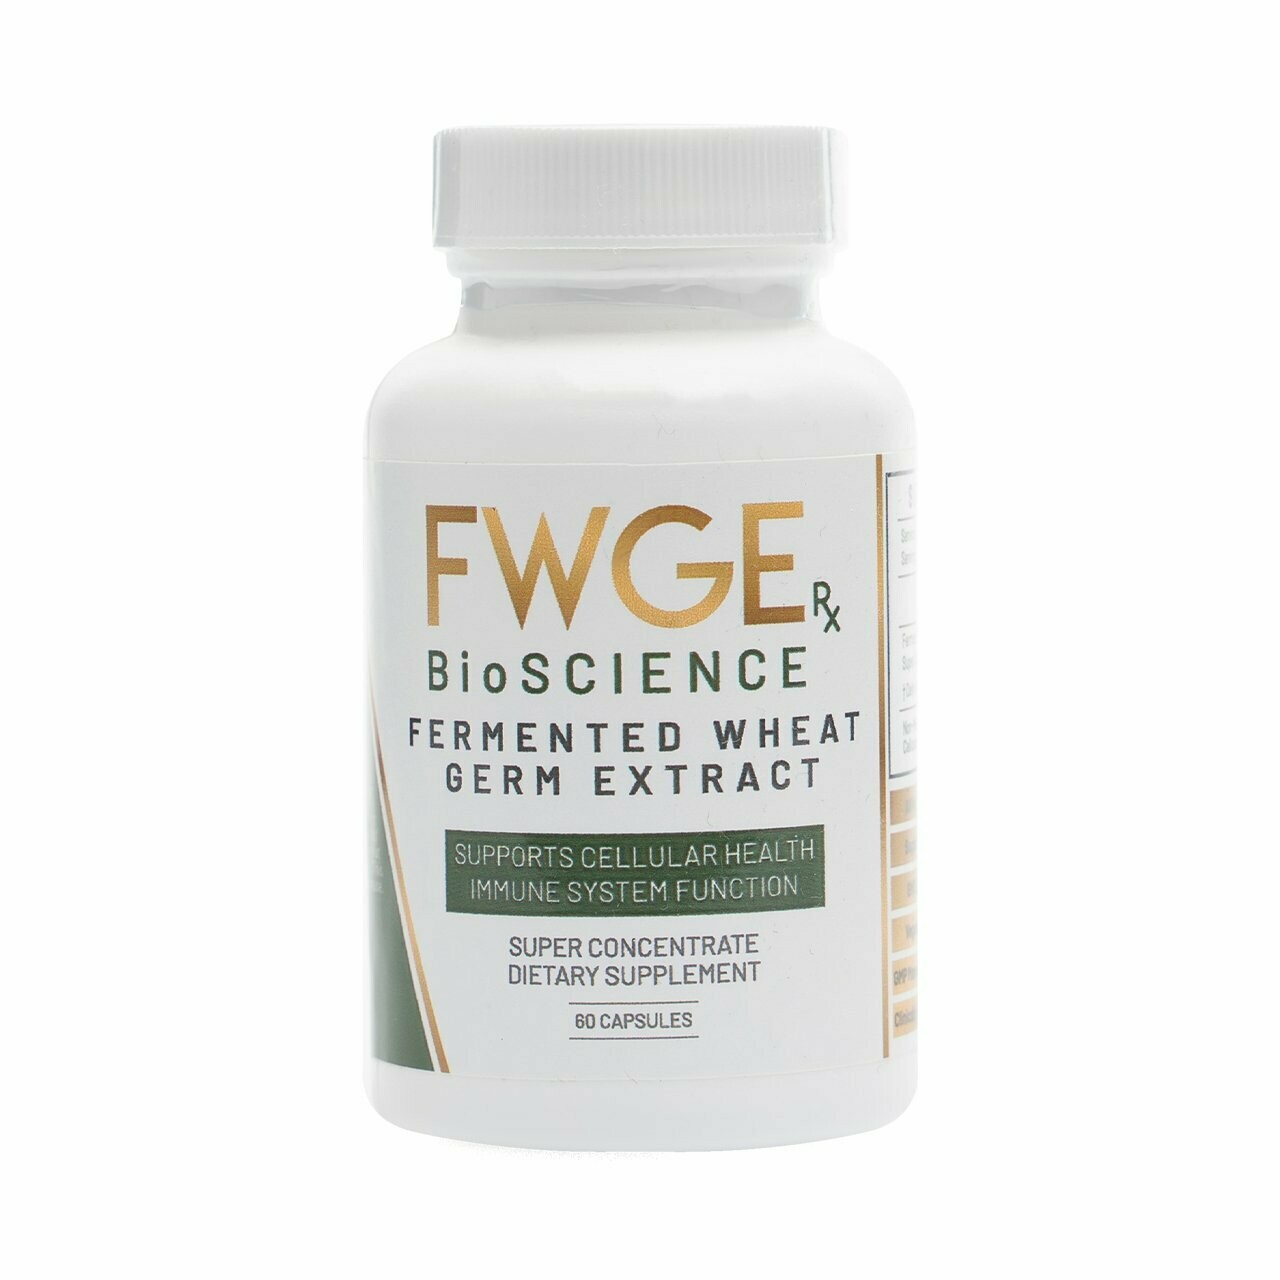 FWGE Rx BioSCIENCE - CELLULAR HEALTH IMMUNE SYSTEM FUNCTION - Capsules